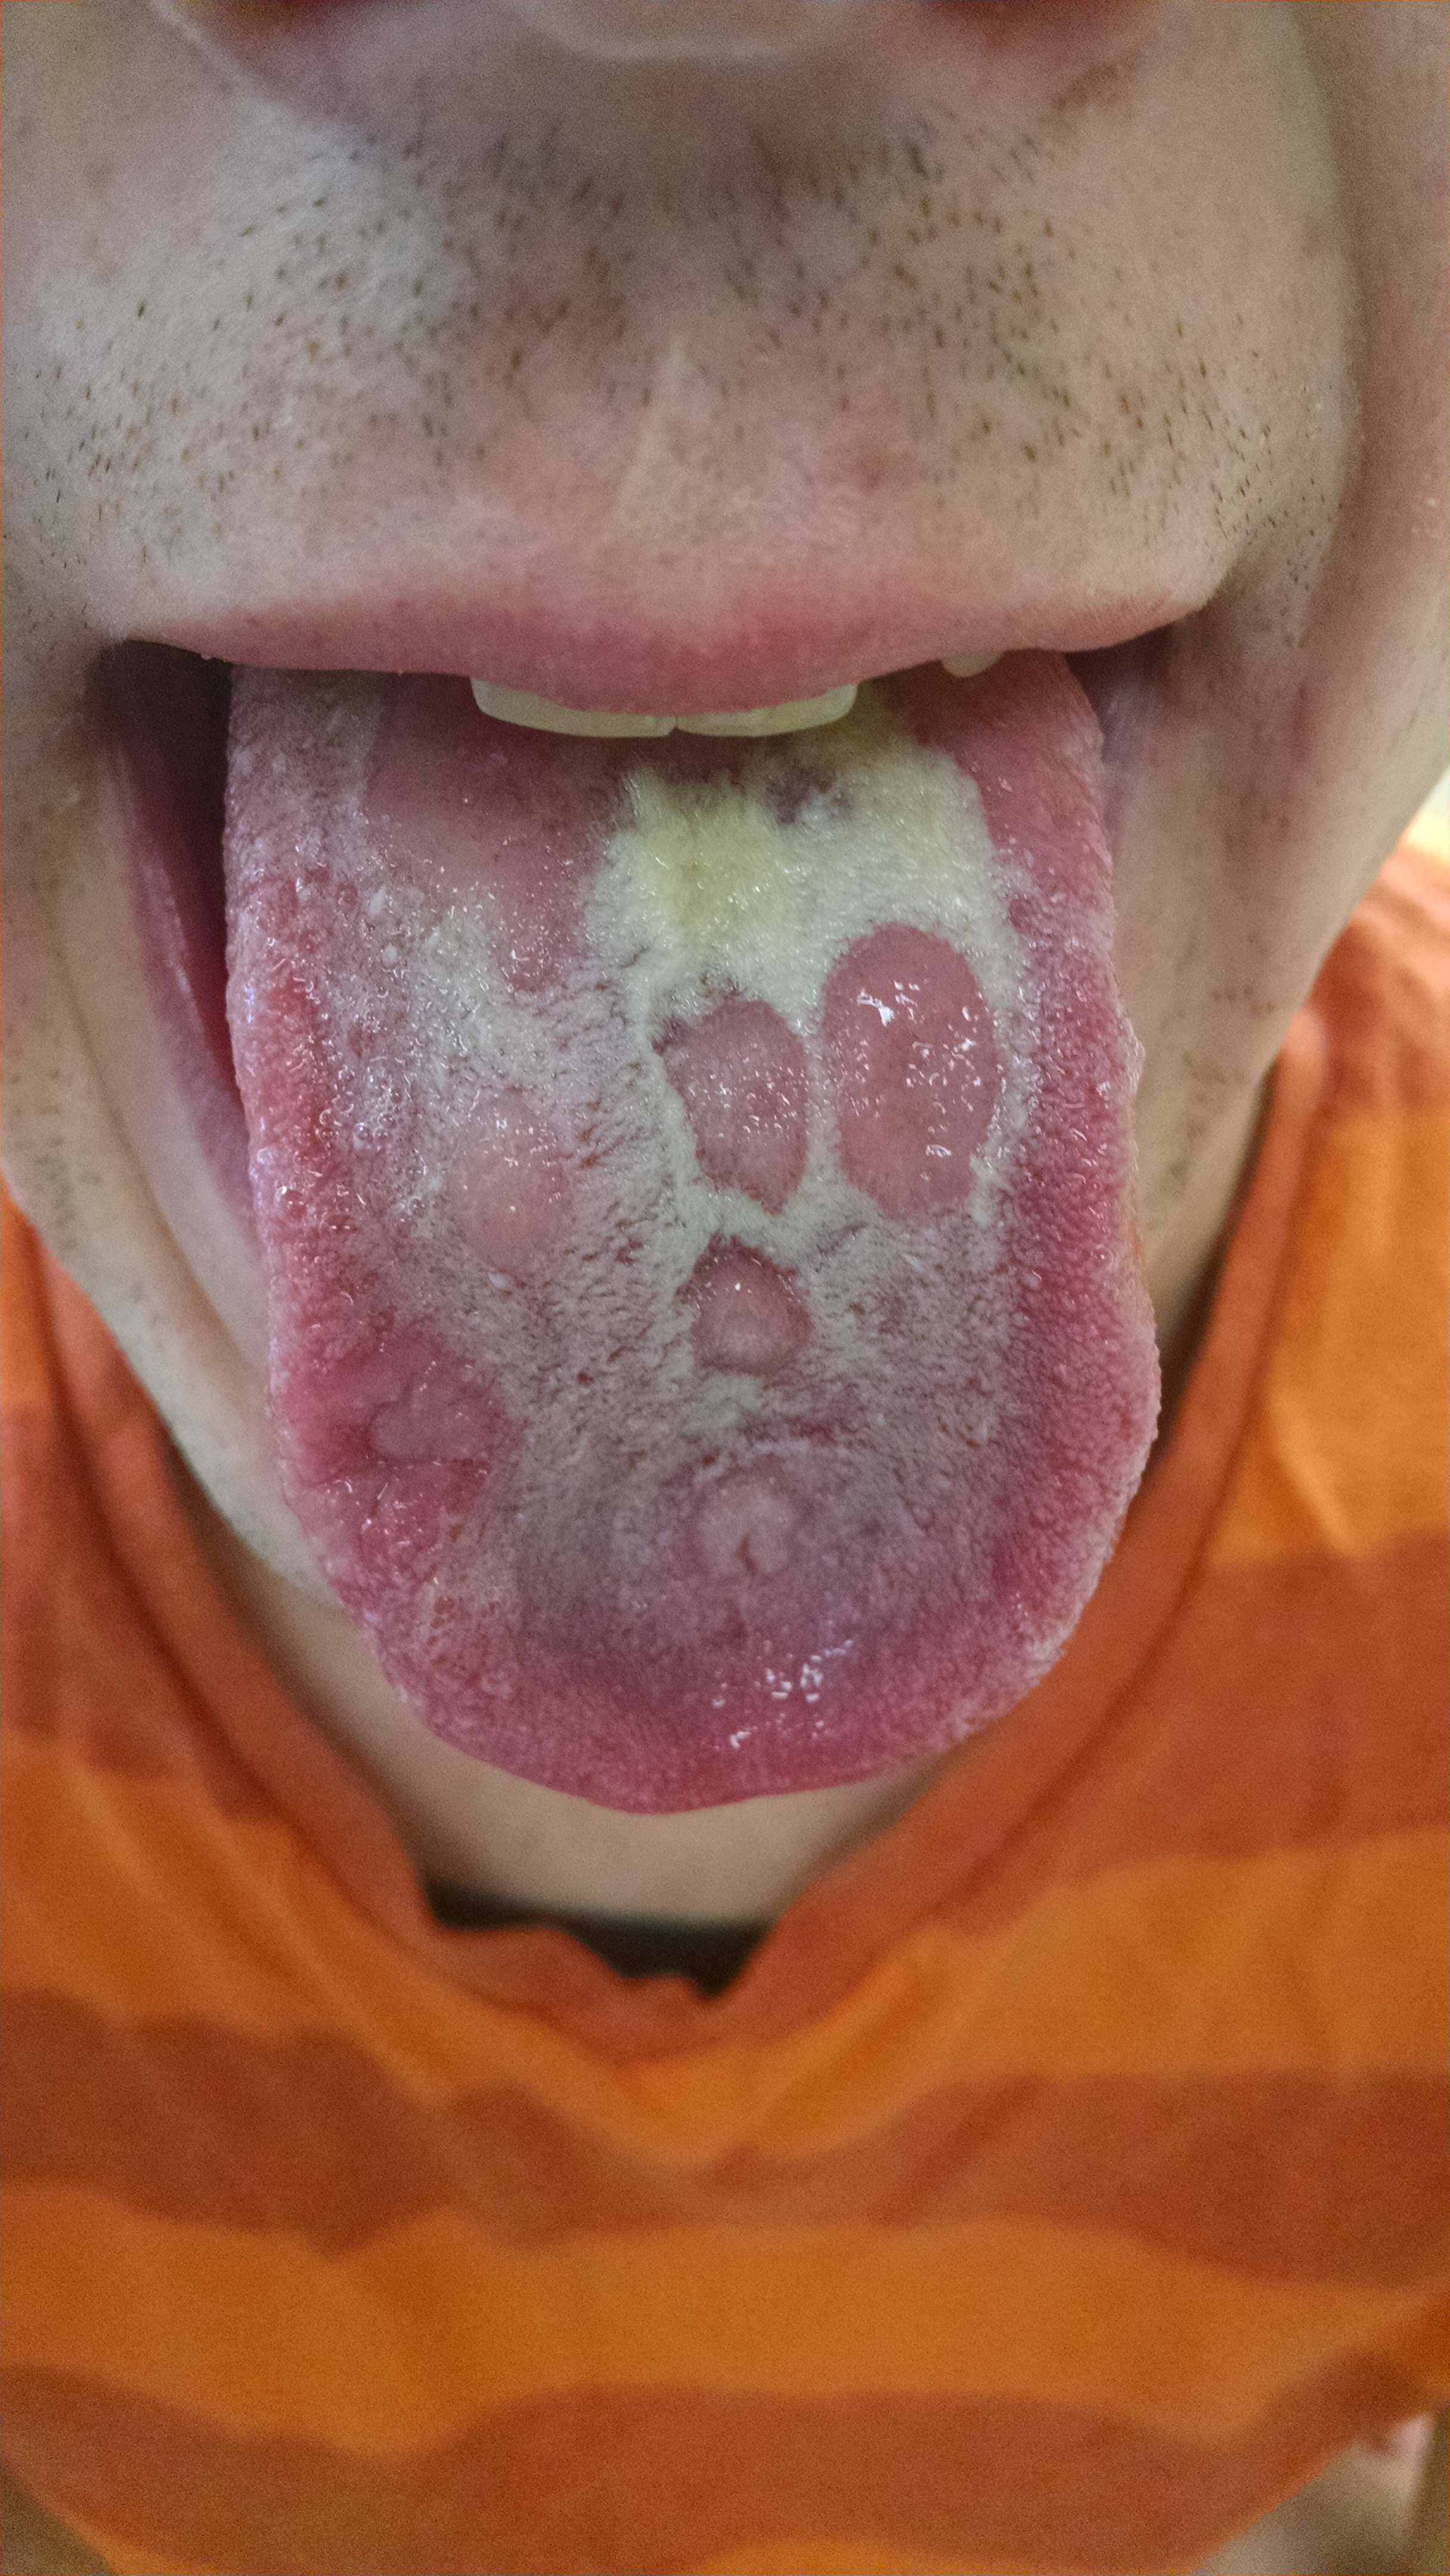 Image of Lesions of secondary syphilis on tongue